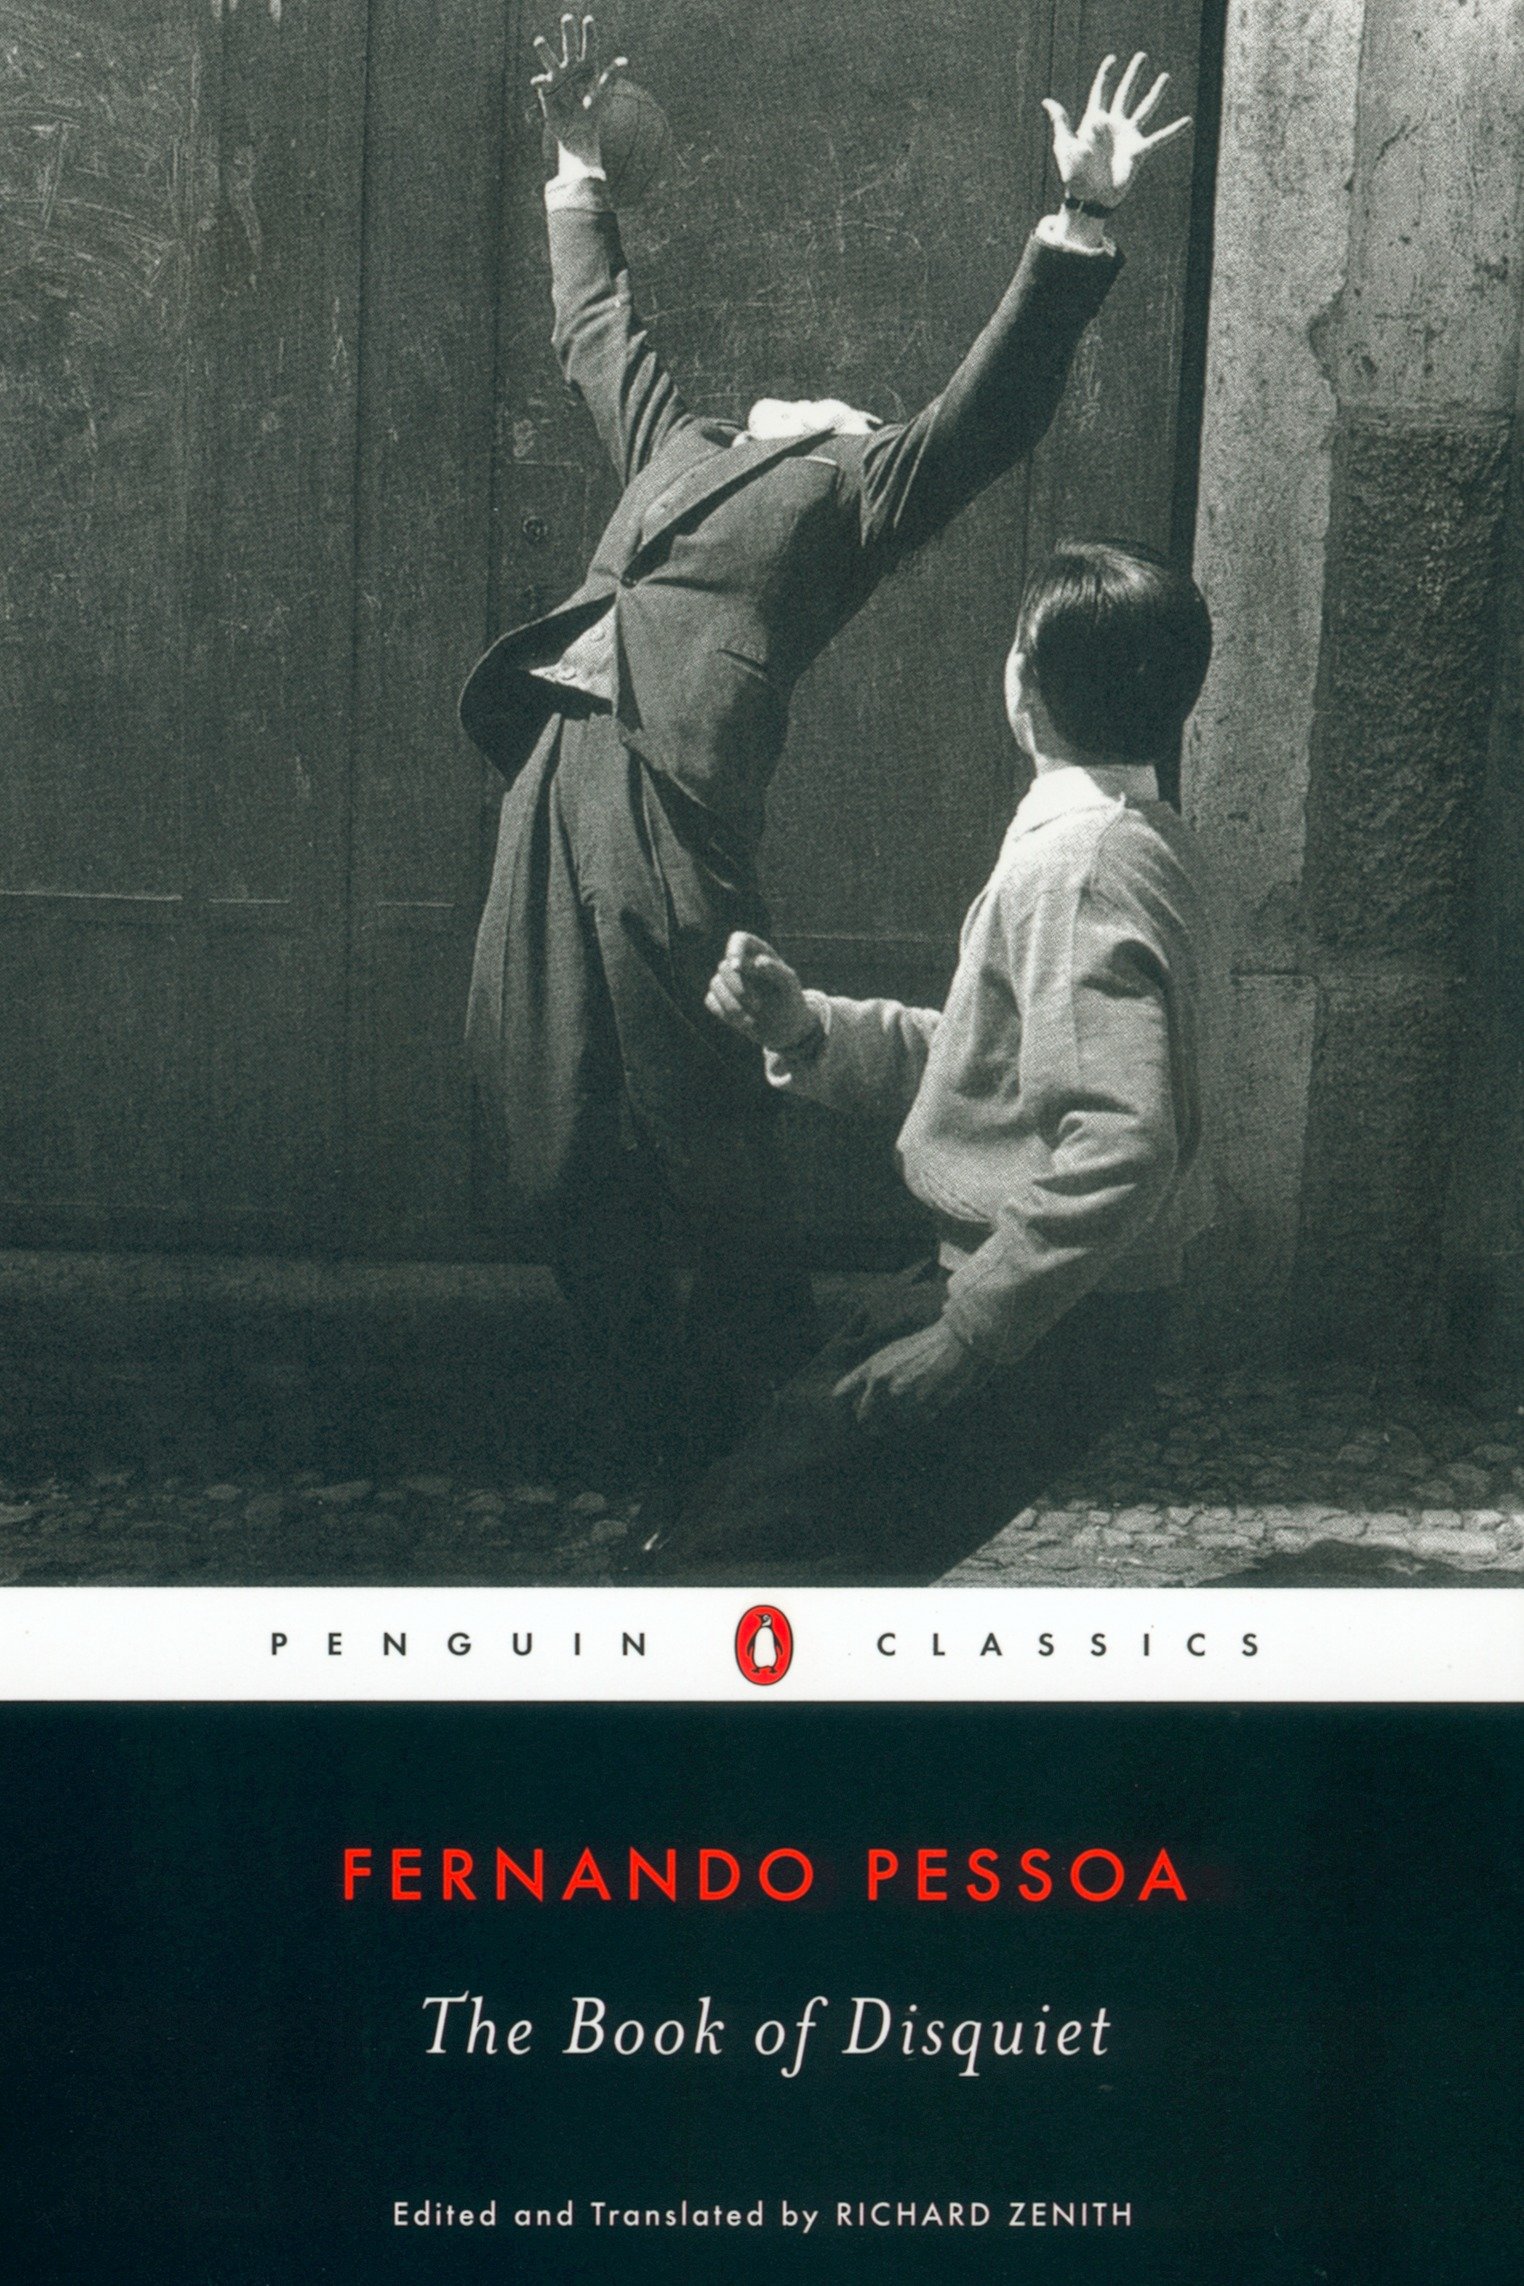 A cover of the Penguins Classics edition of The Book of Disquiet. It is a black and white photo of a man throwing his hands in the air, and the back of a boy's head, looking at the other man. The text "Fernando Pessoa" is in bright orange letters, characteristic of Penguin Classics. 